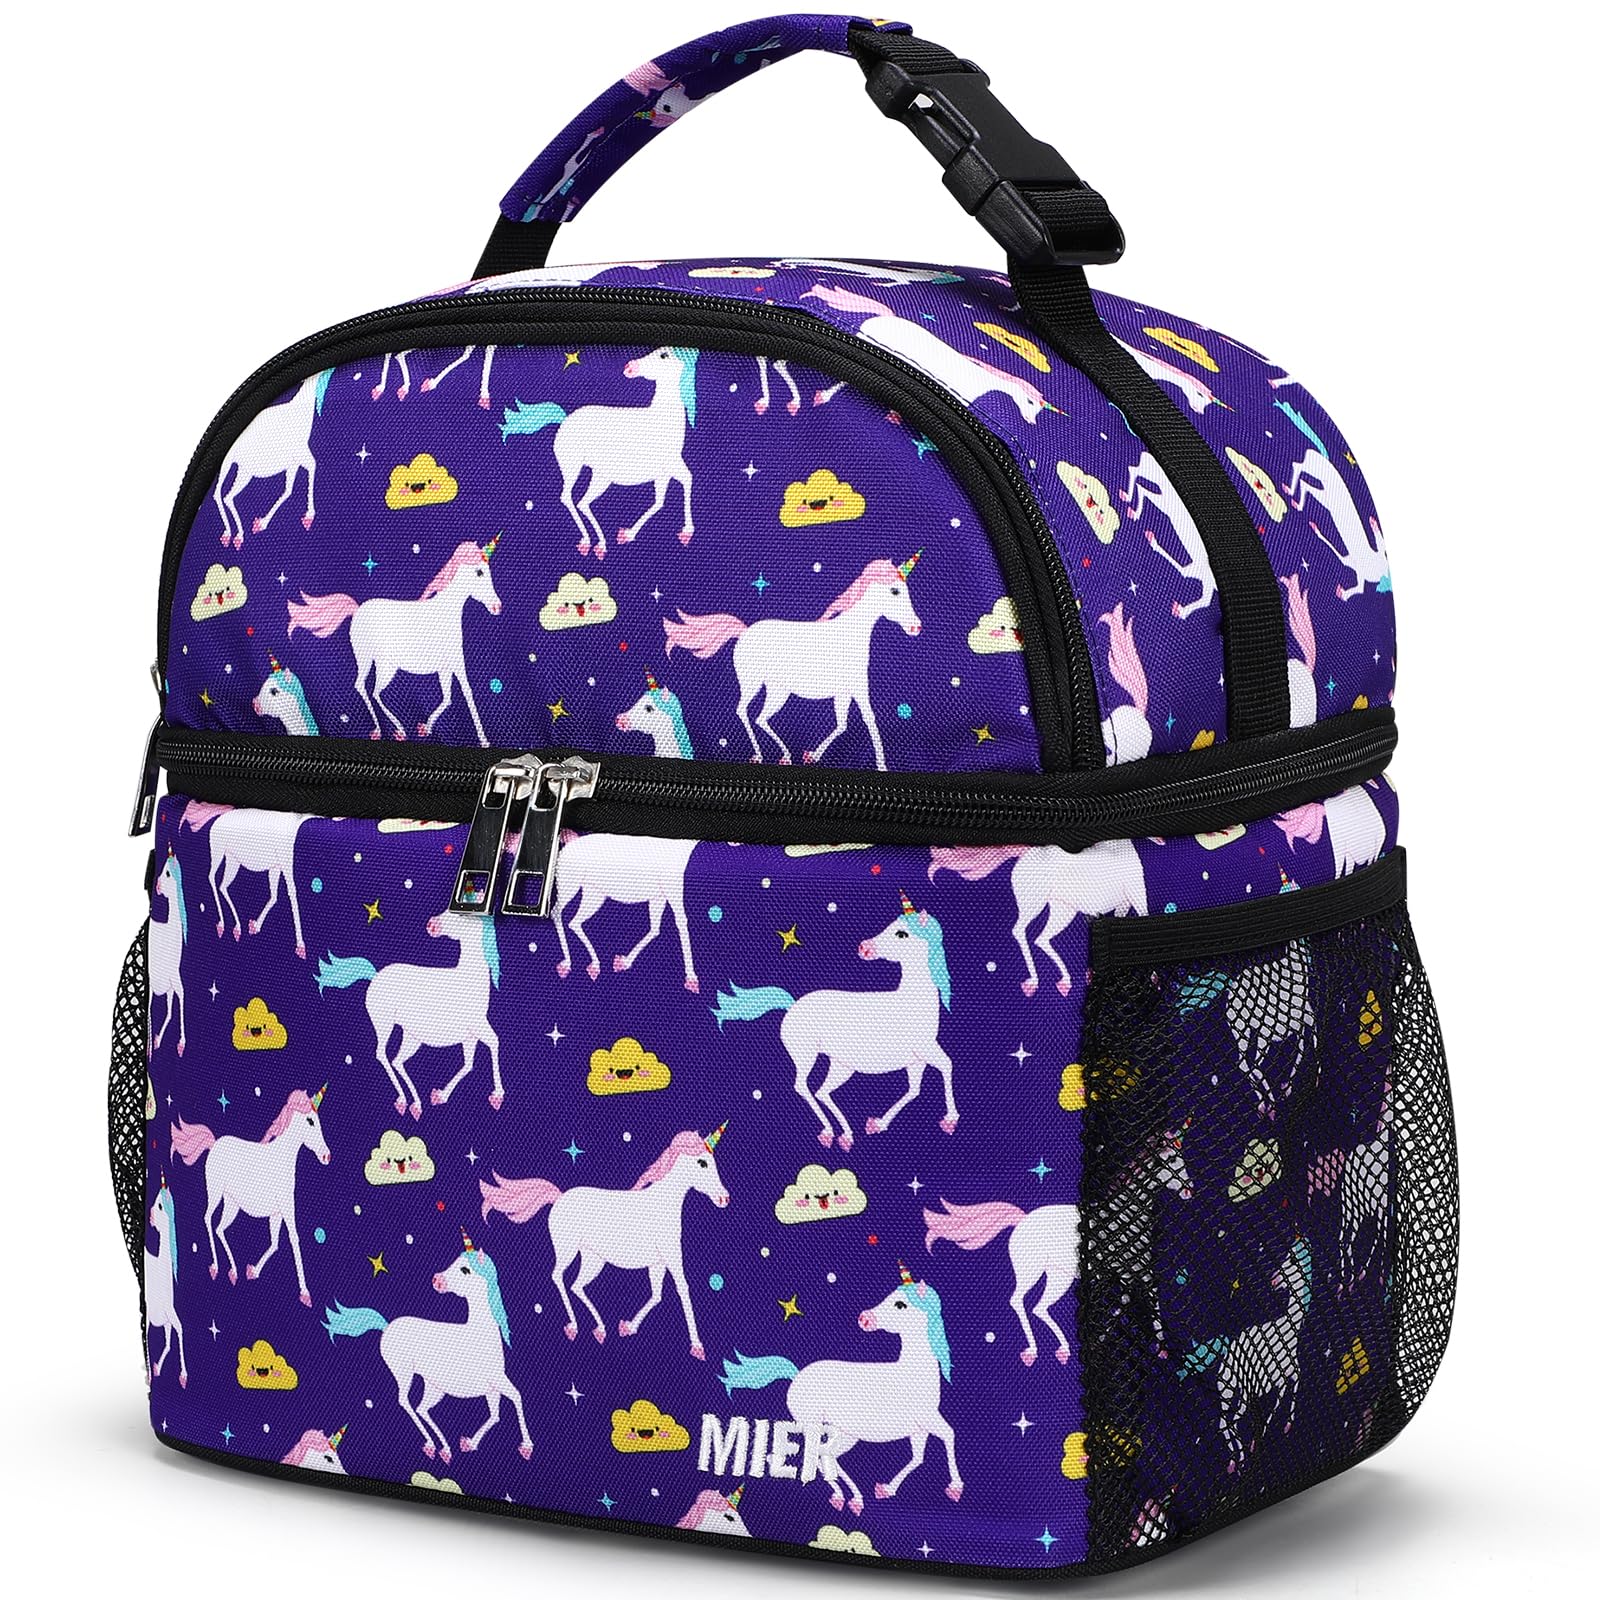 2 in 1 Little Unicorn Kids Backpack with Insulated Lunch Bag